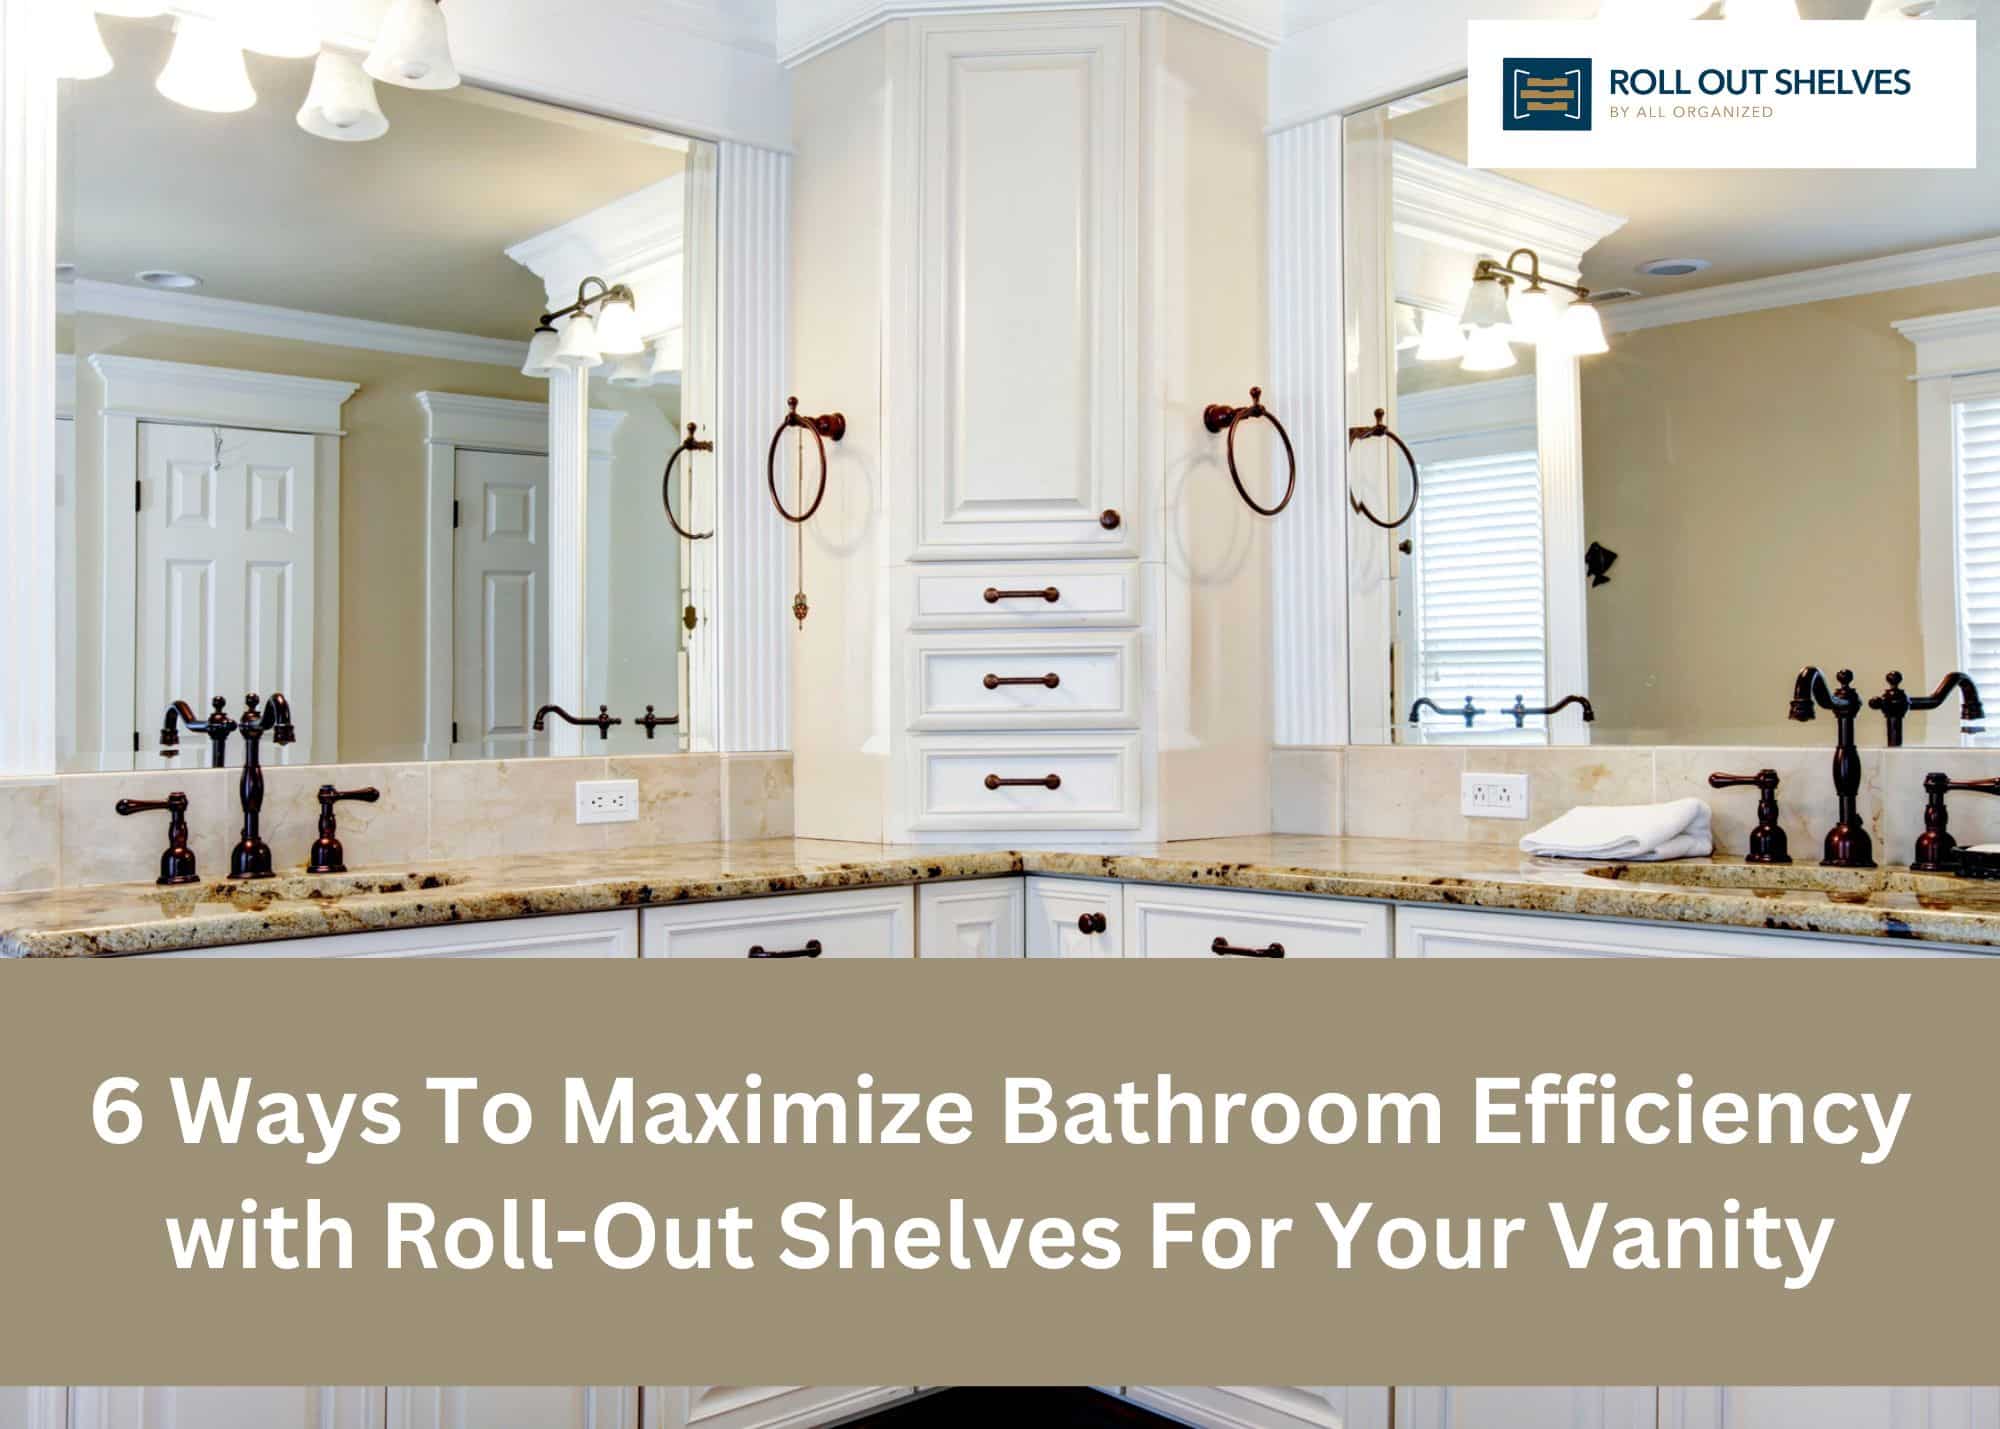 Bathroom Cabinet Roll Out Shelves Maximize Your Storage and